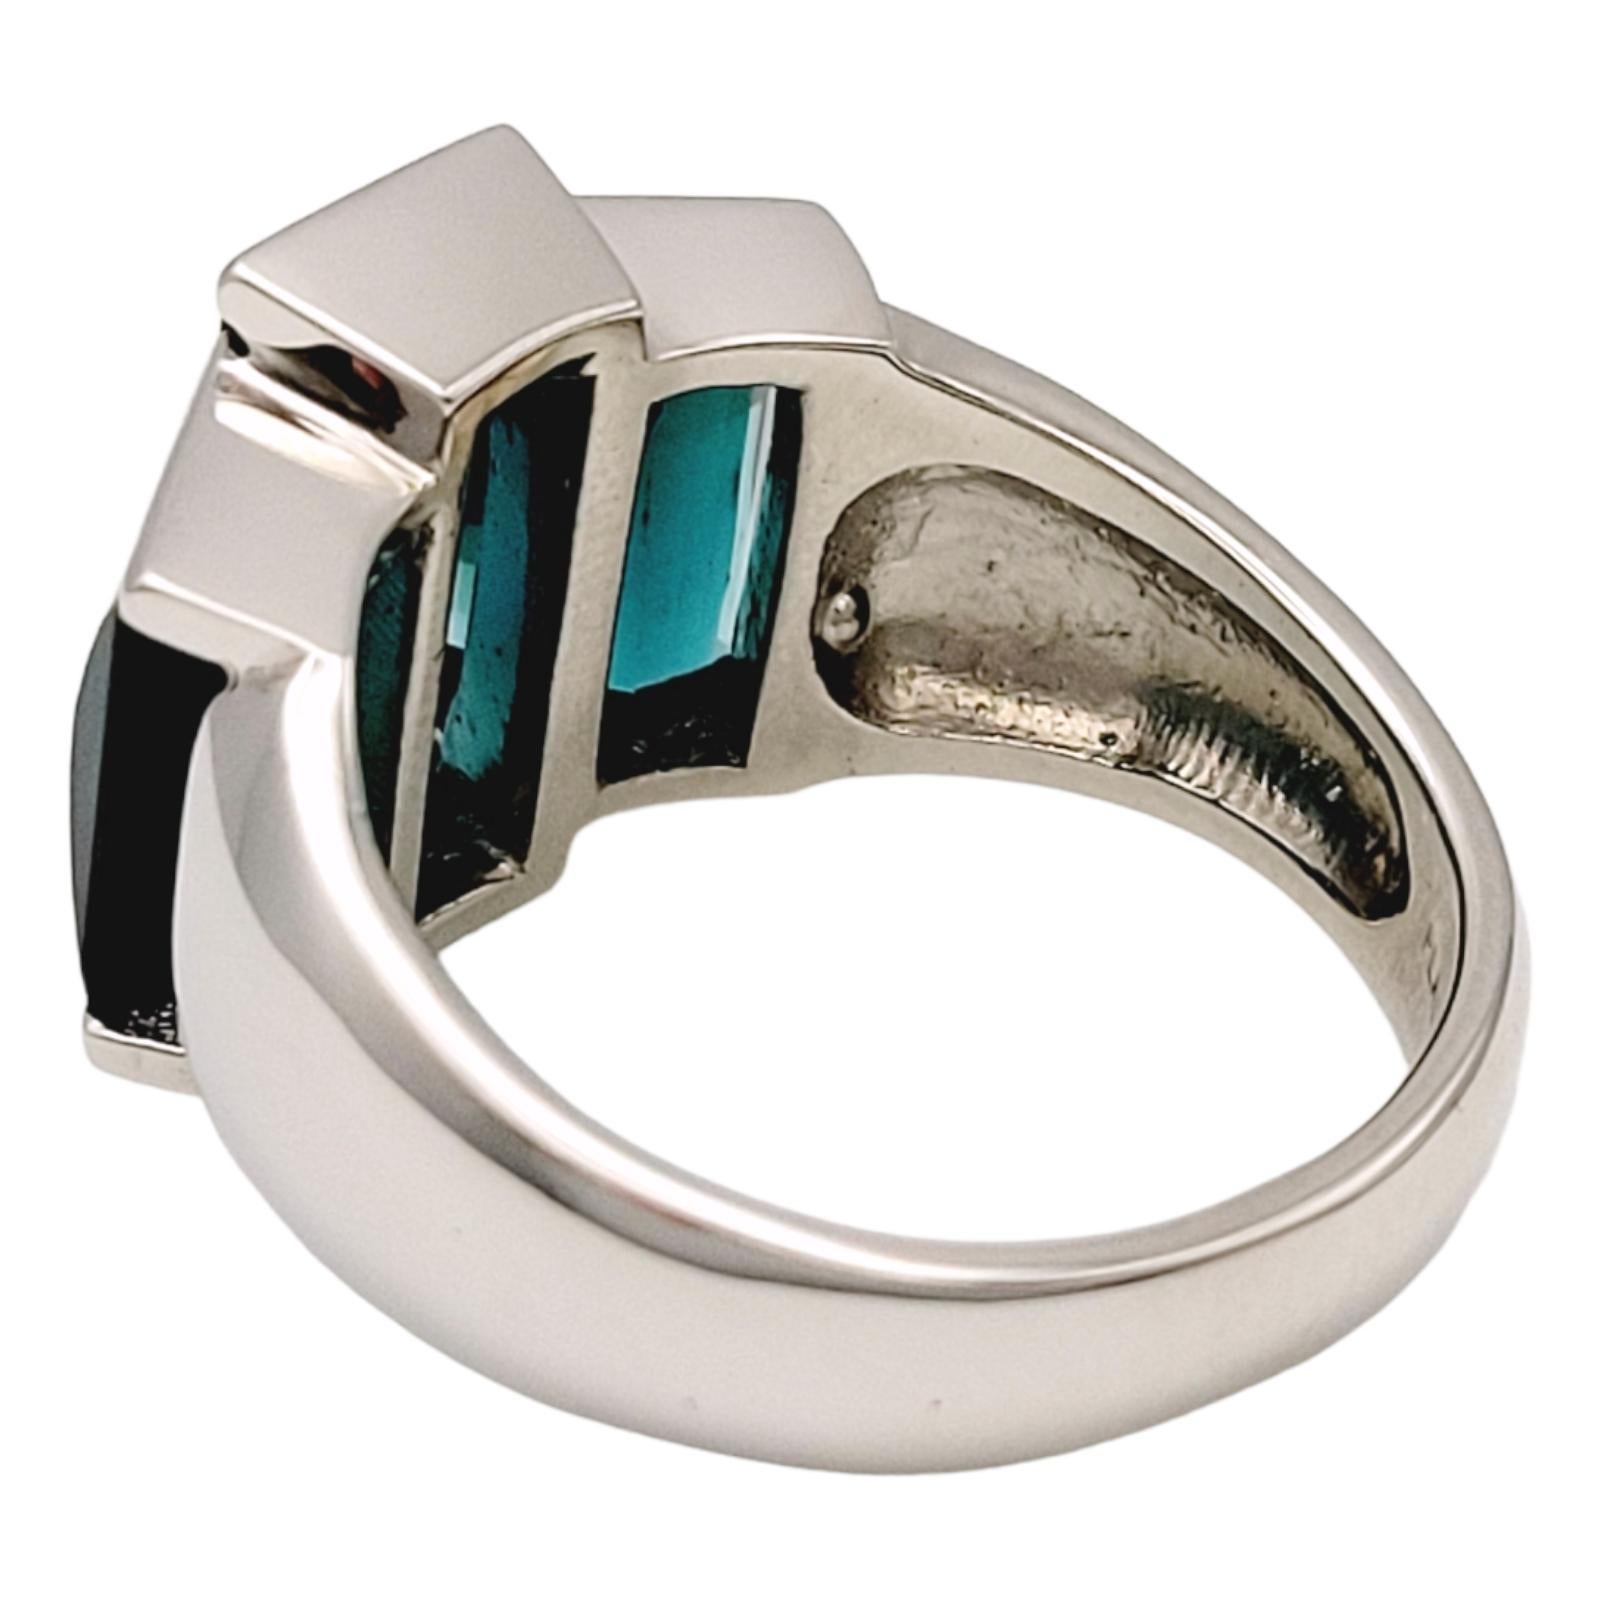 9 Carat Rectangular Step Cut Three Stone Tourmaline Cocktail Ring in Platinum In Good Condition For Sale In Scottsdale, AZ